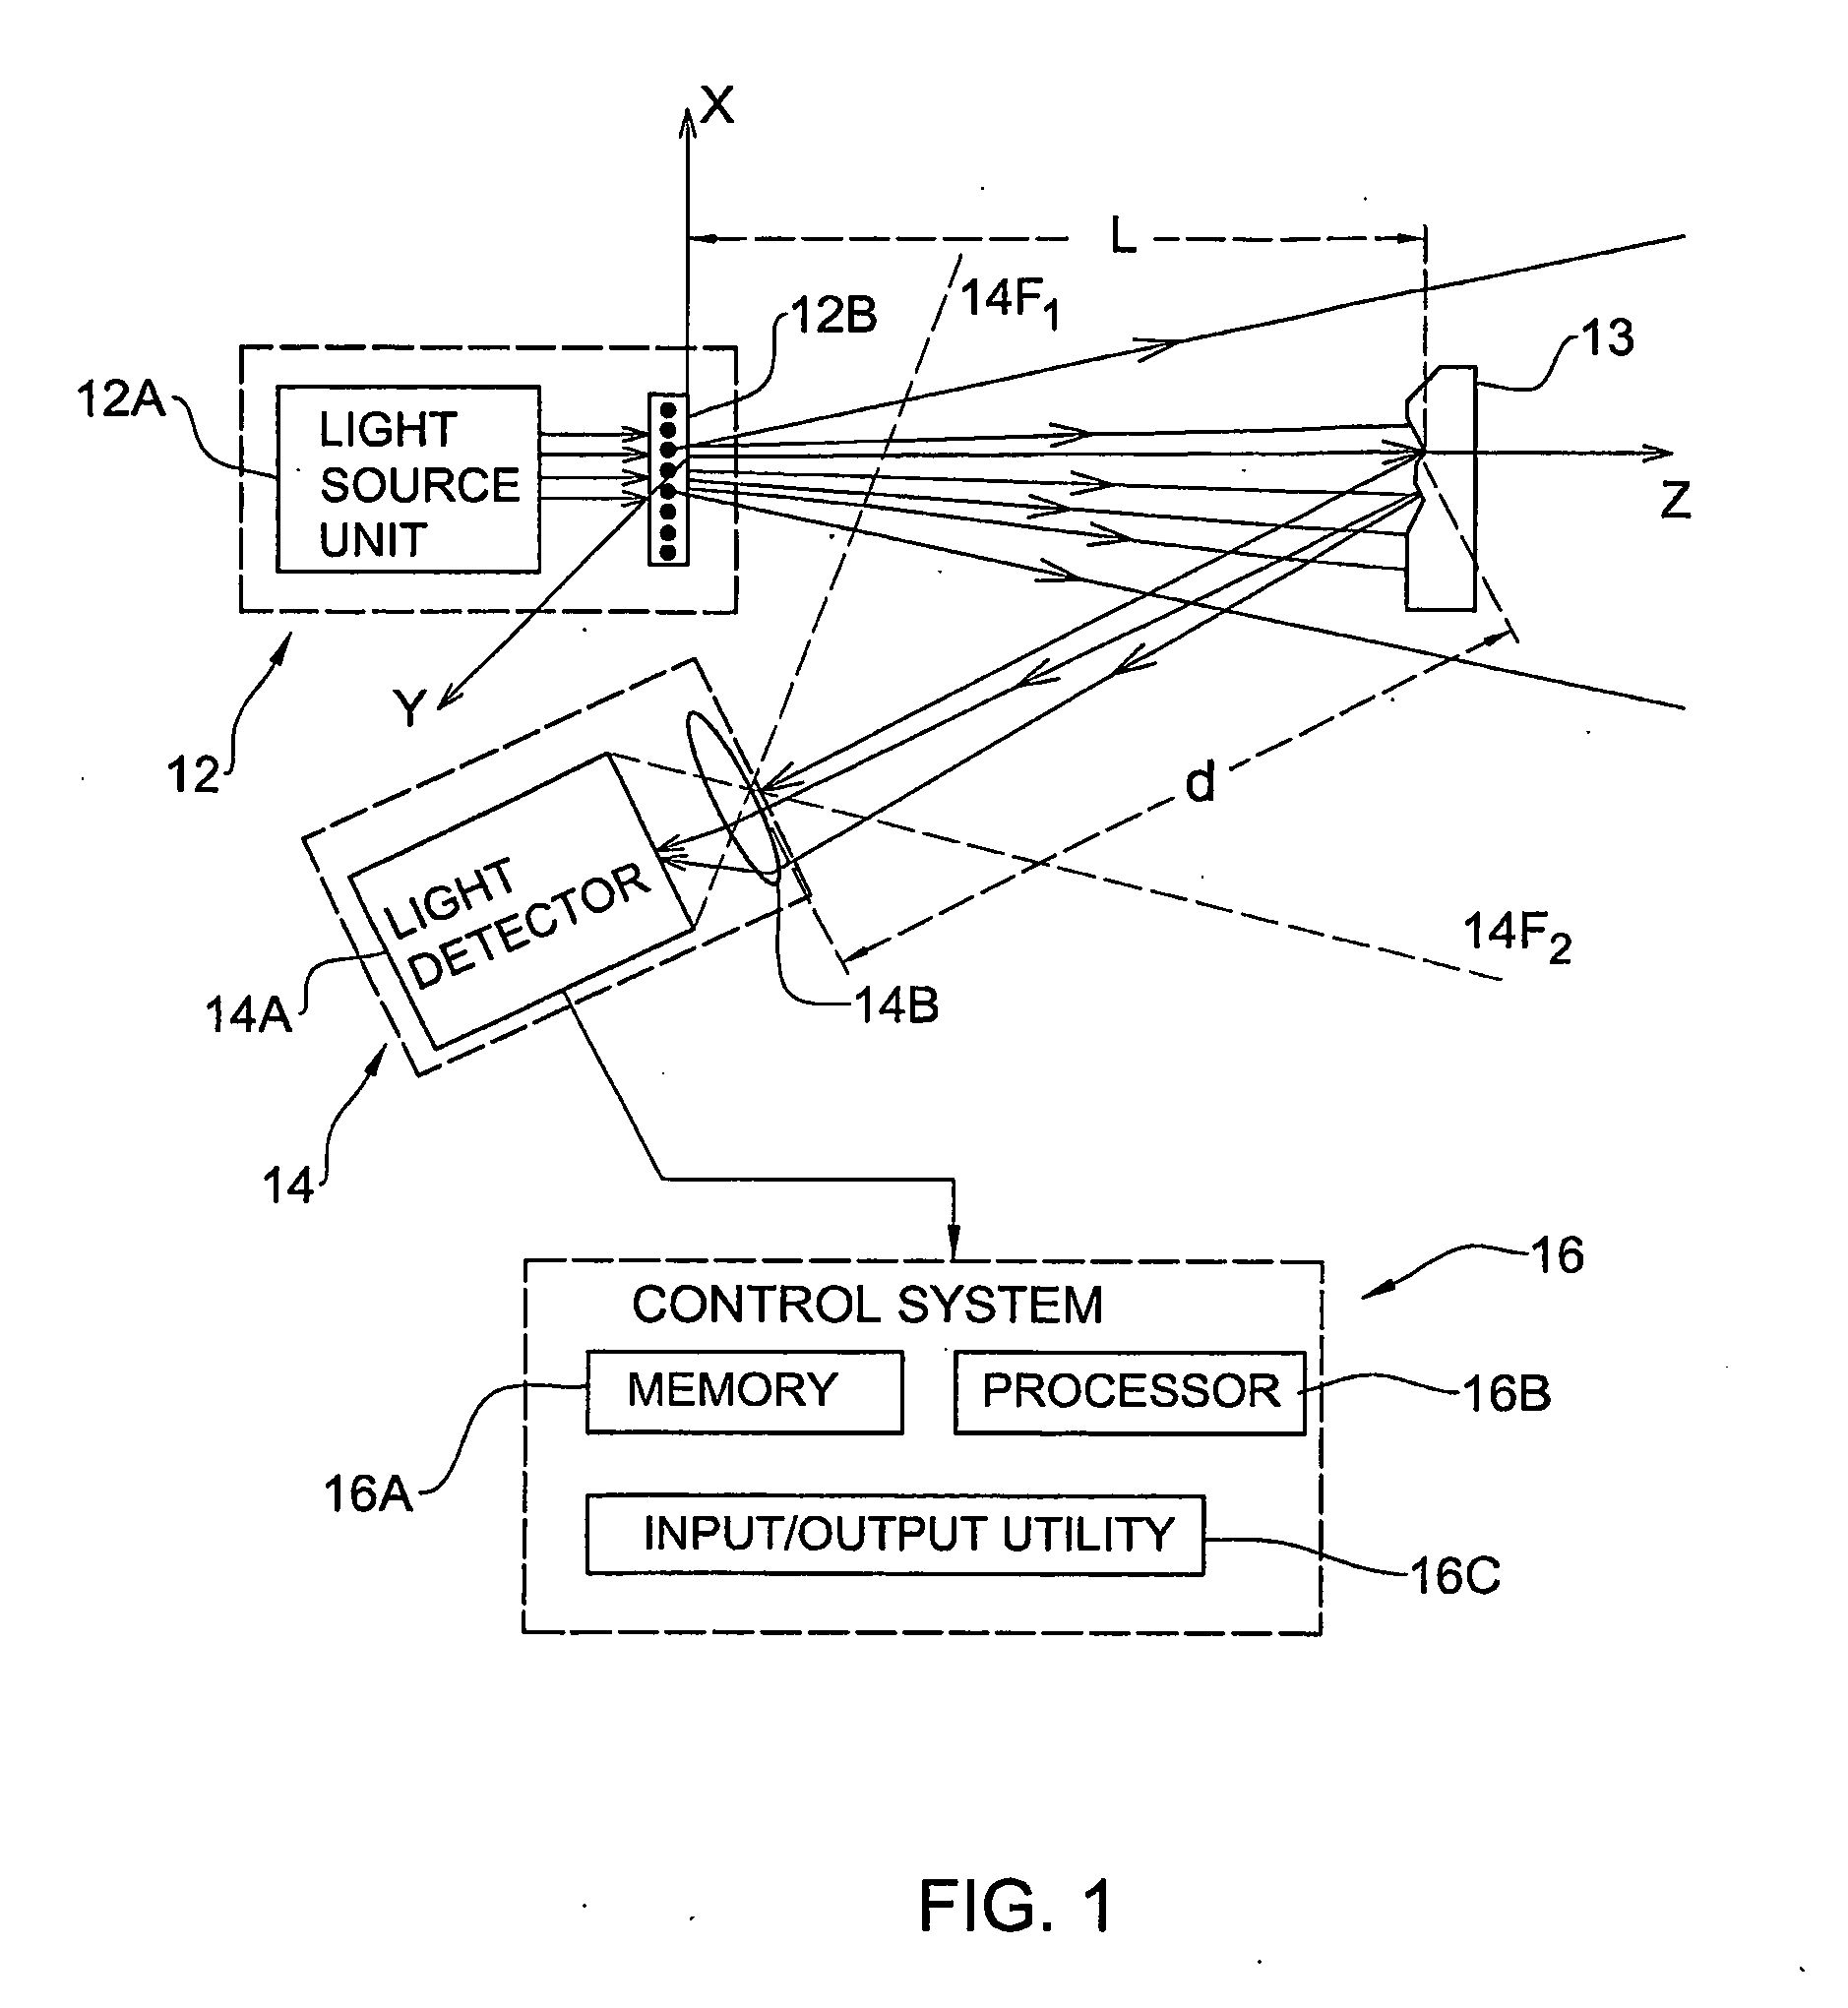 Method and System for Object Reconstruction